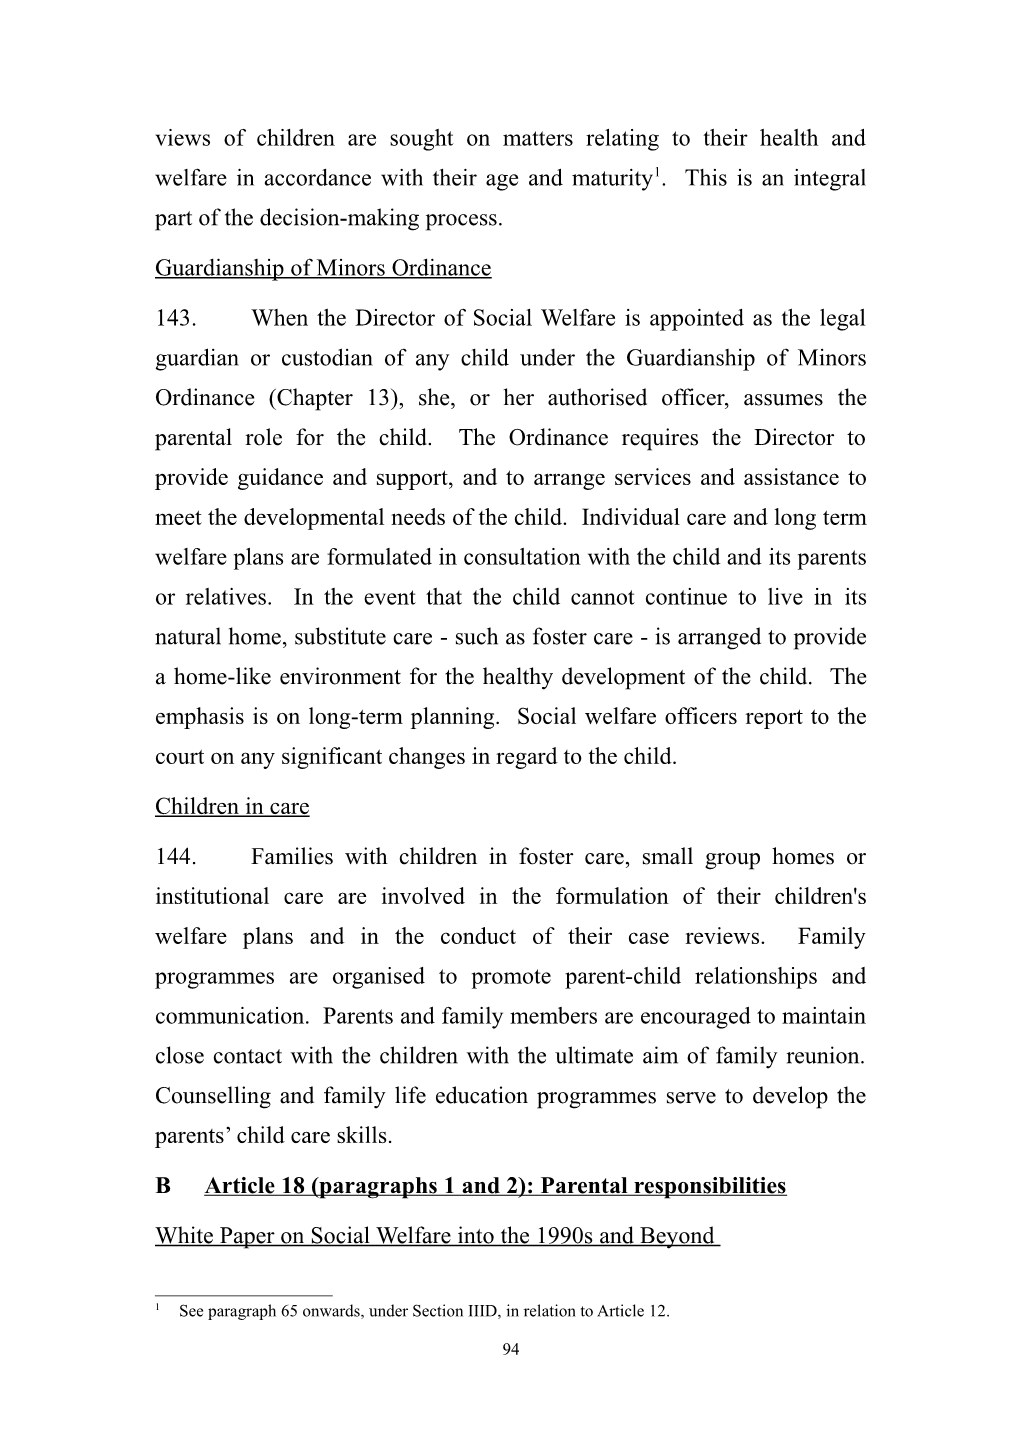 V.Family Environment and Alternative Care (Articles 5, 18(1), 18(2), 9, 10, 27(4), 20